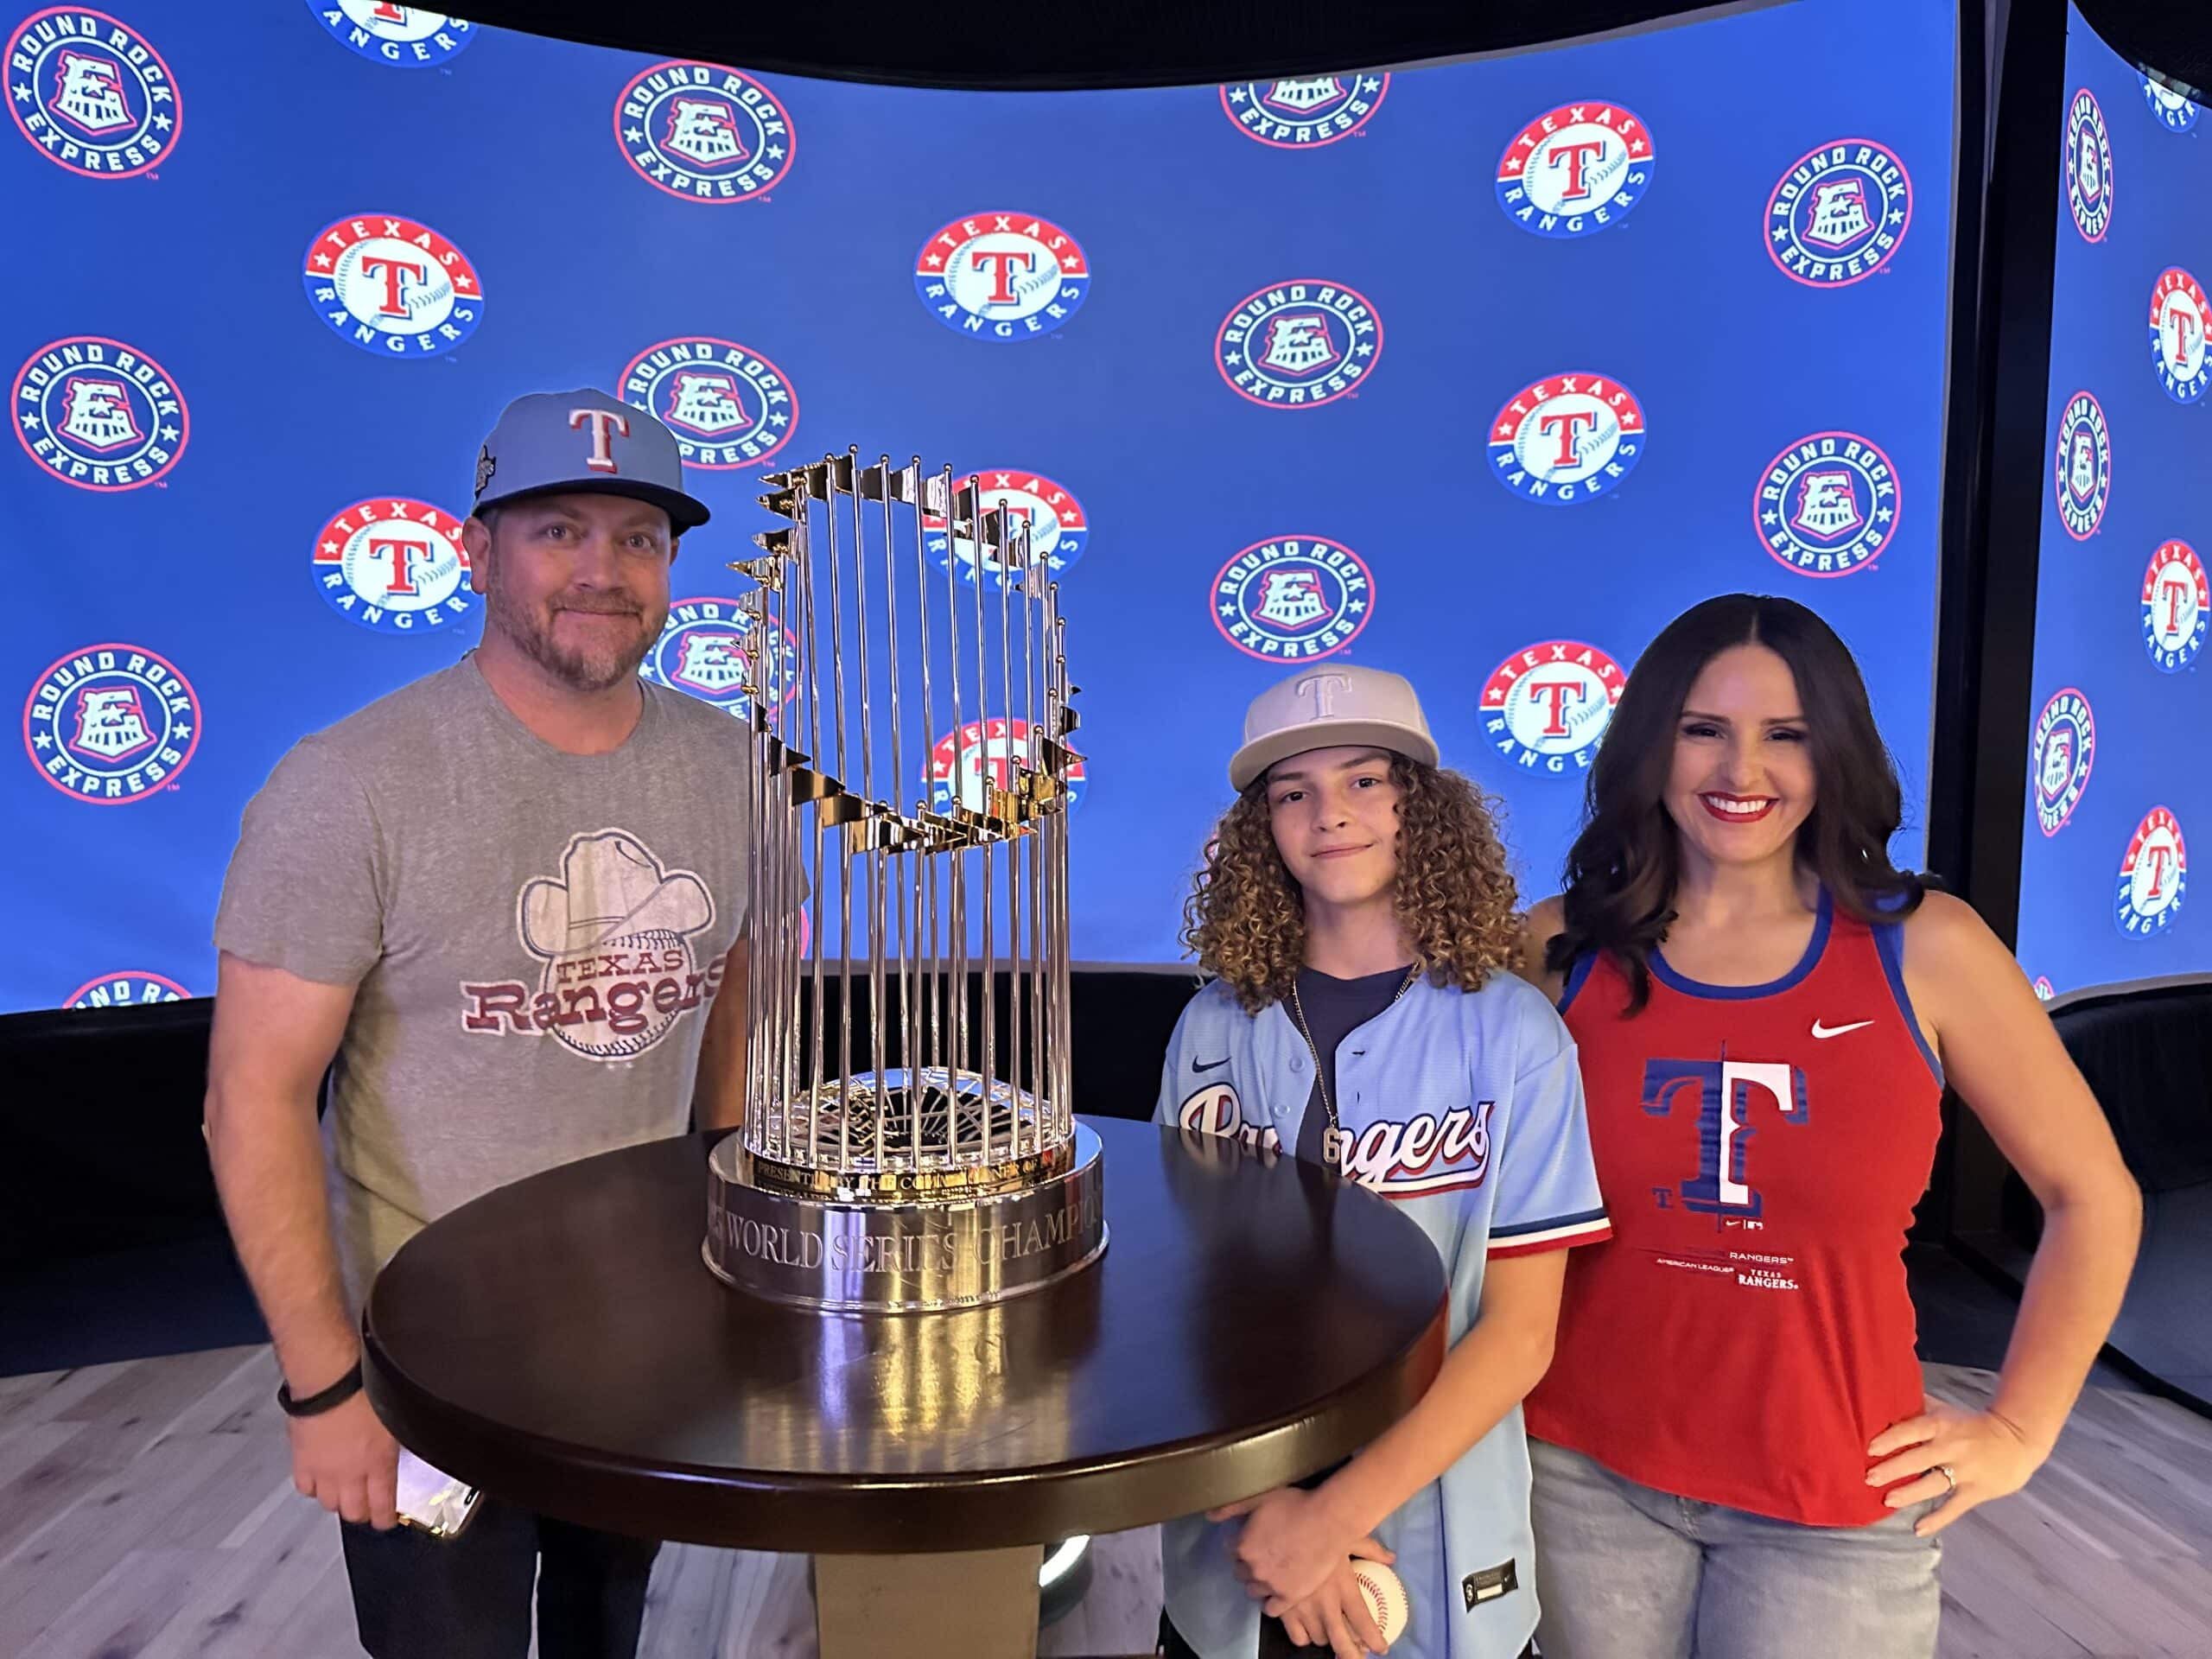 Texas Rangers World Series Trophy Photo Opportunity at the Round Rock Express baseball game